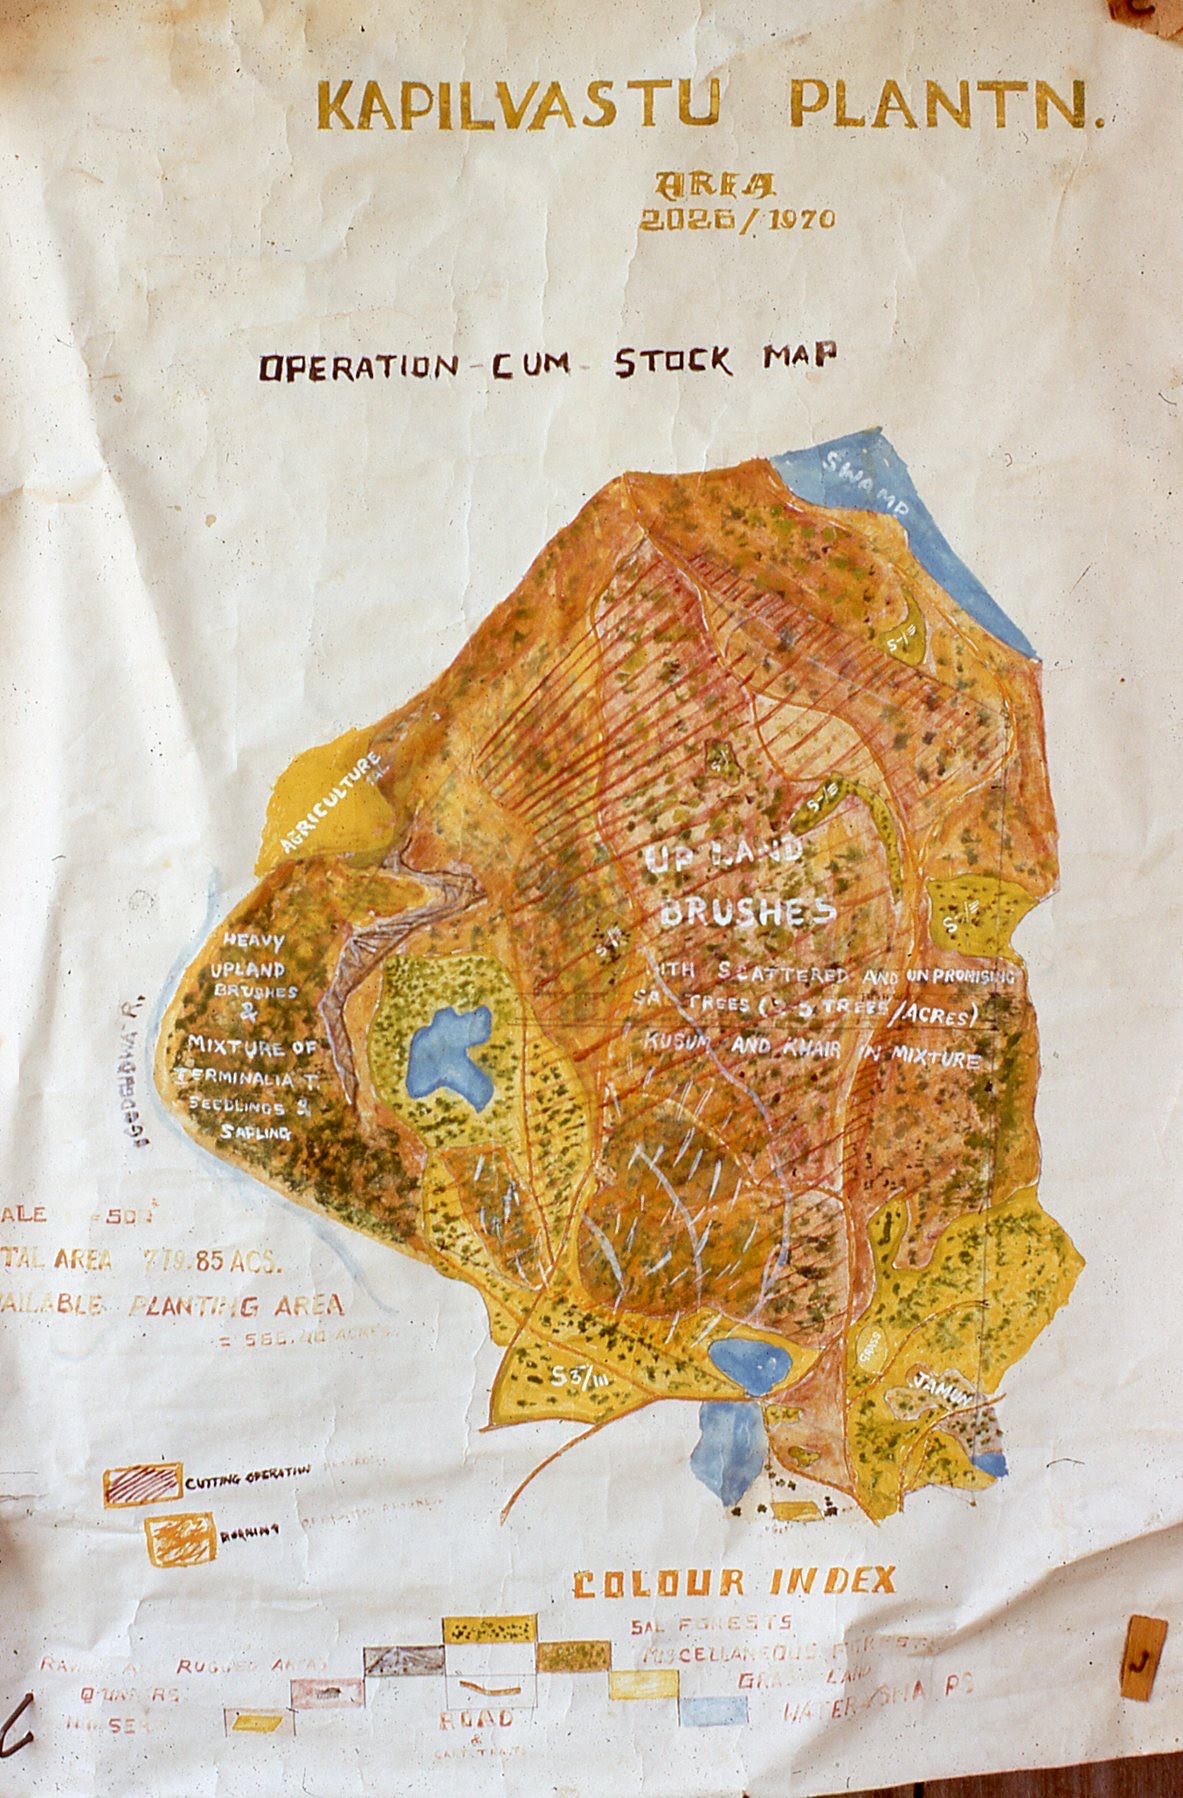 Agricultural map reads "Operation Cum Stock Map," and outlines trees, water sources, and topographical landmarks.